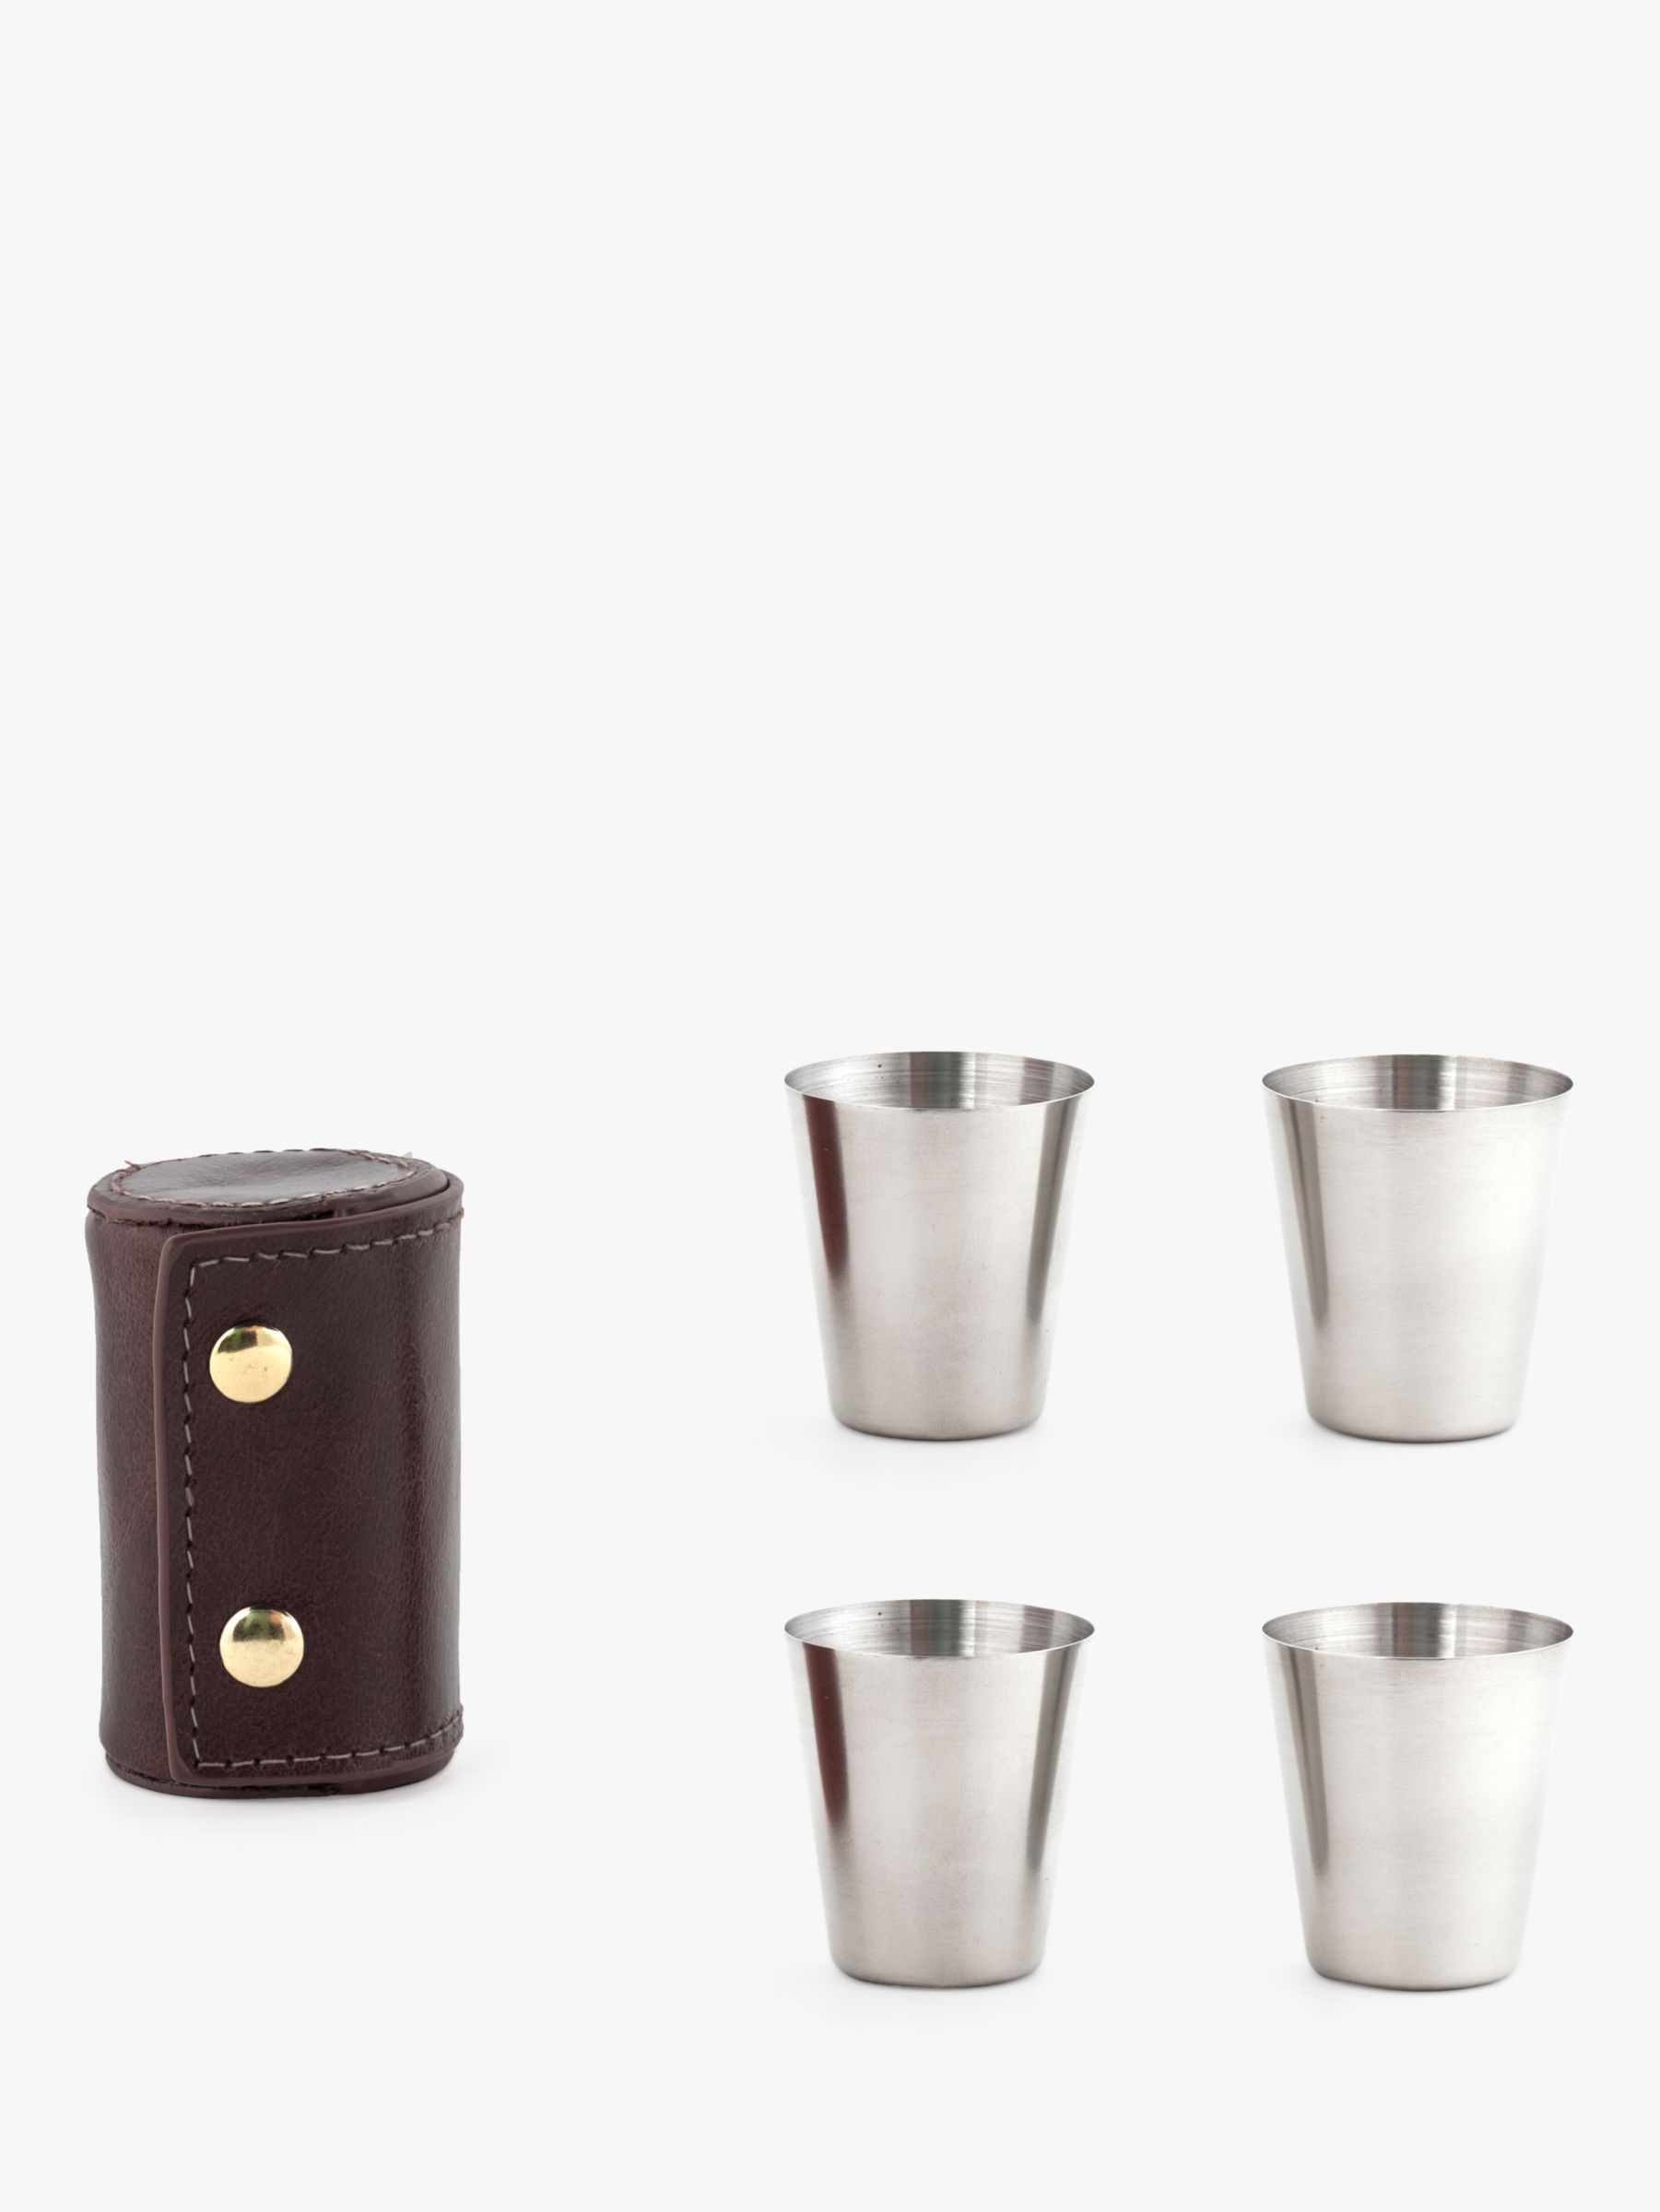 Travel 4pc Stainless Steel Shot Glass Set with Leather Case Kikkerland Camping 